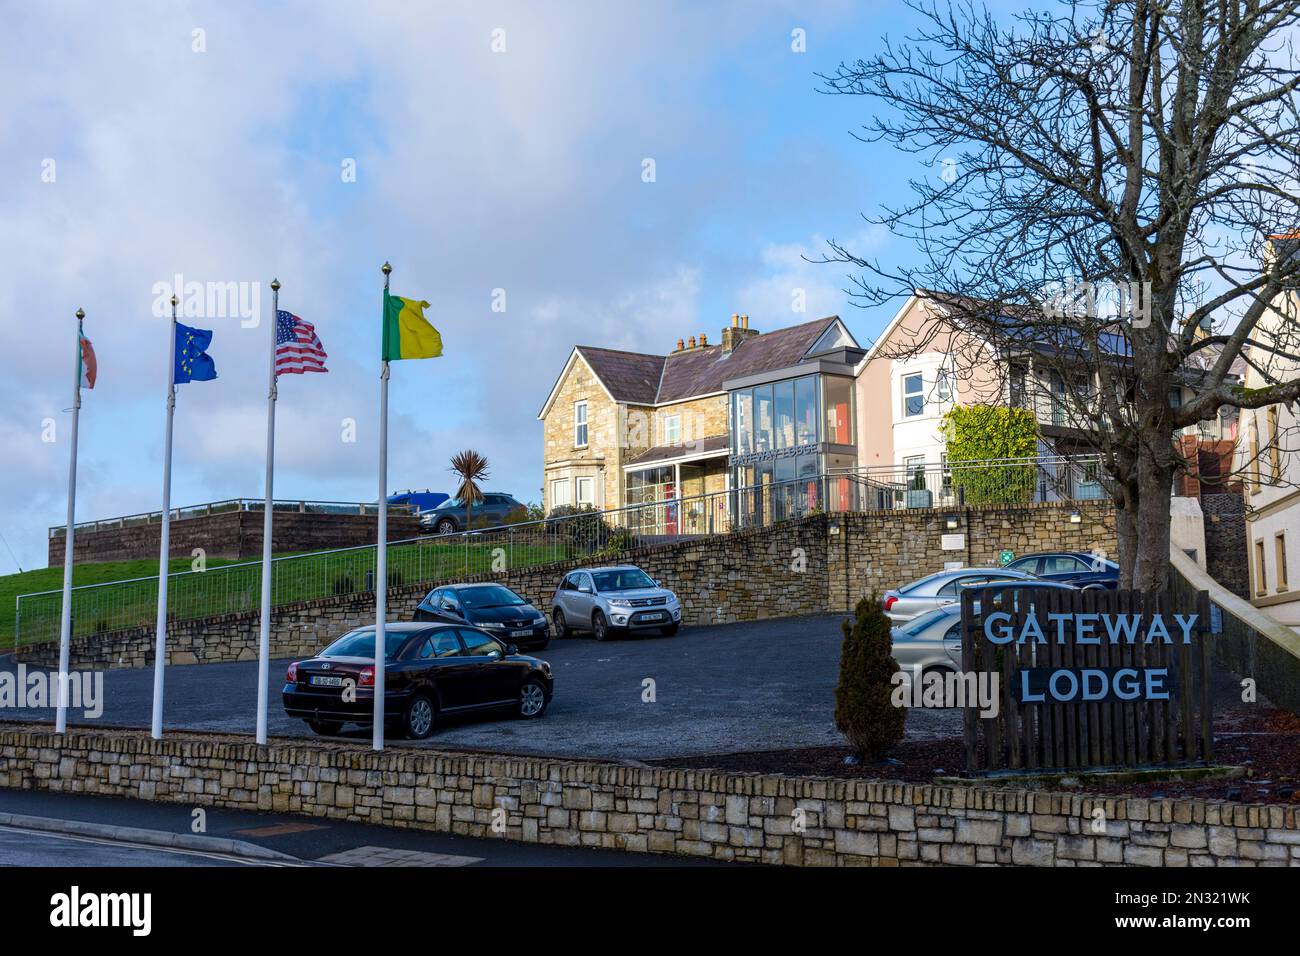 The Gateway Lodge hotel, bar and restaurant in Donegal Town, County Donegal, Ireland Stock Photo